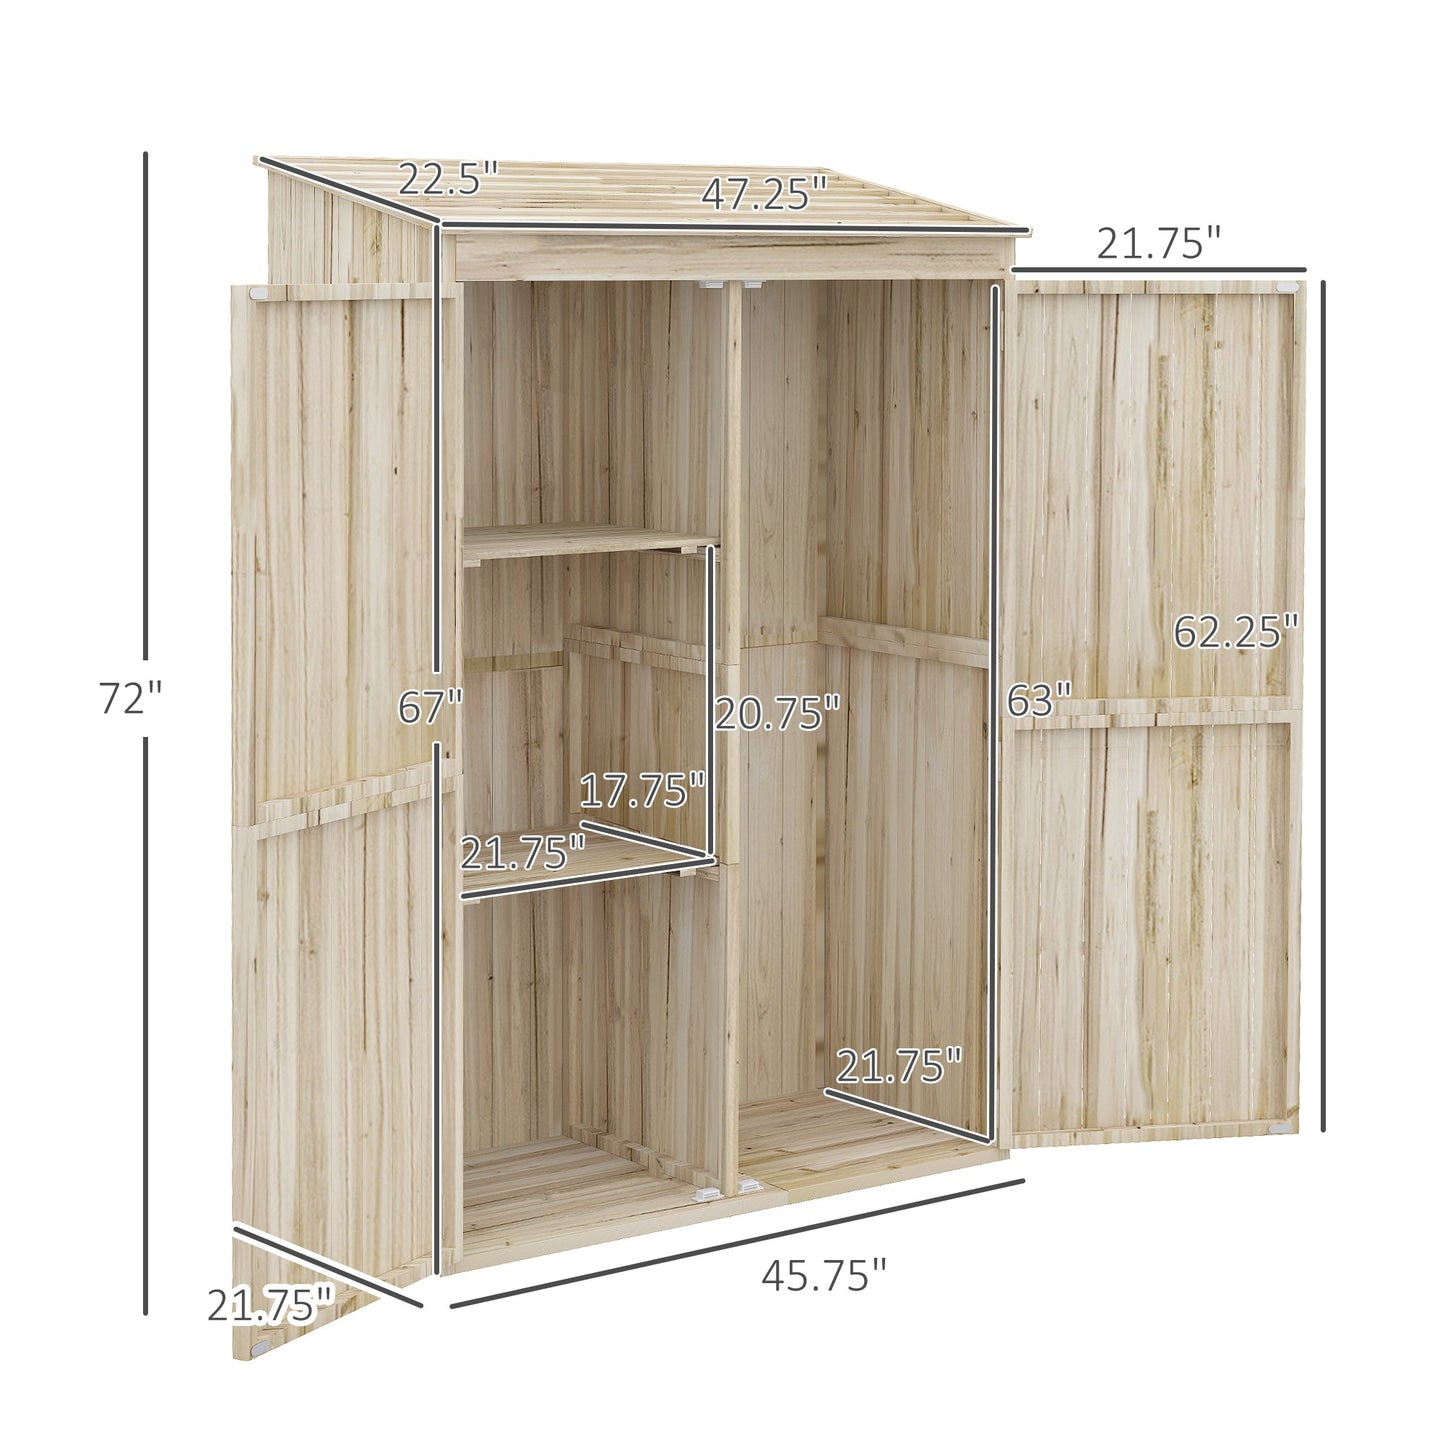 Outdoor and Garden-Wooden Garden Shed Tool Storage, Garden Shed with Double Magnet Doors, Tilted Roof, 47.25" x 22.5" x 72'', Natural - Outdoor Style Company